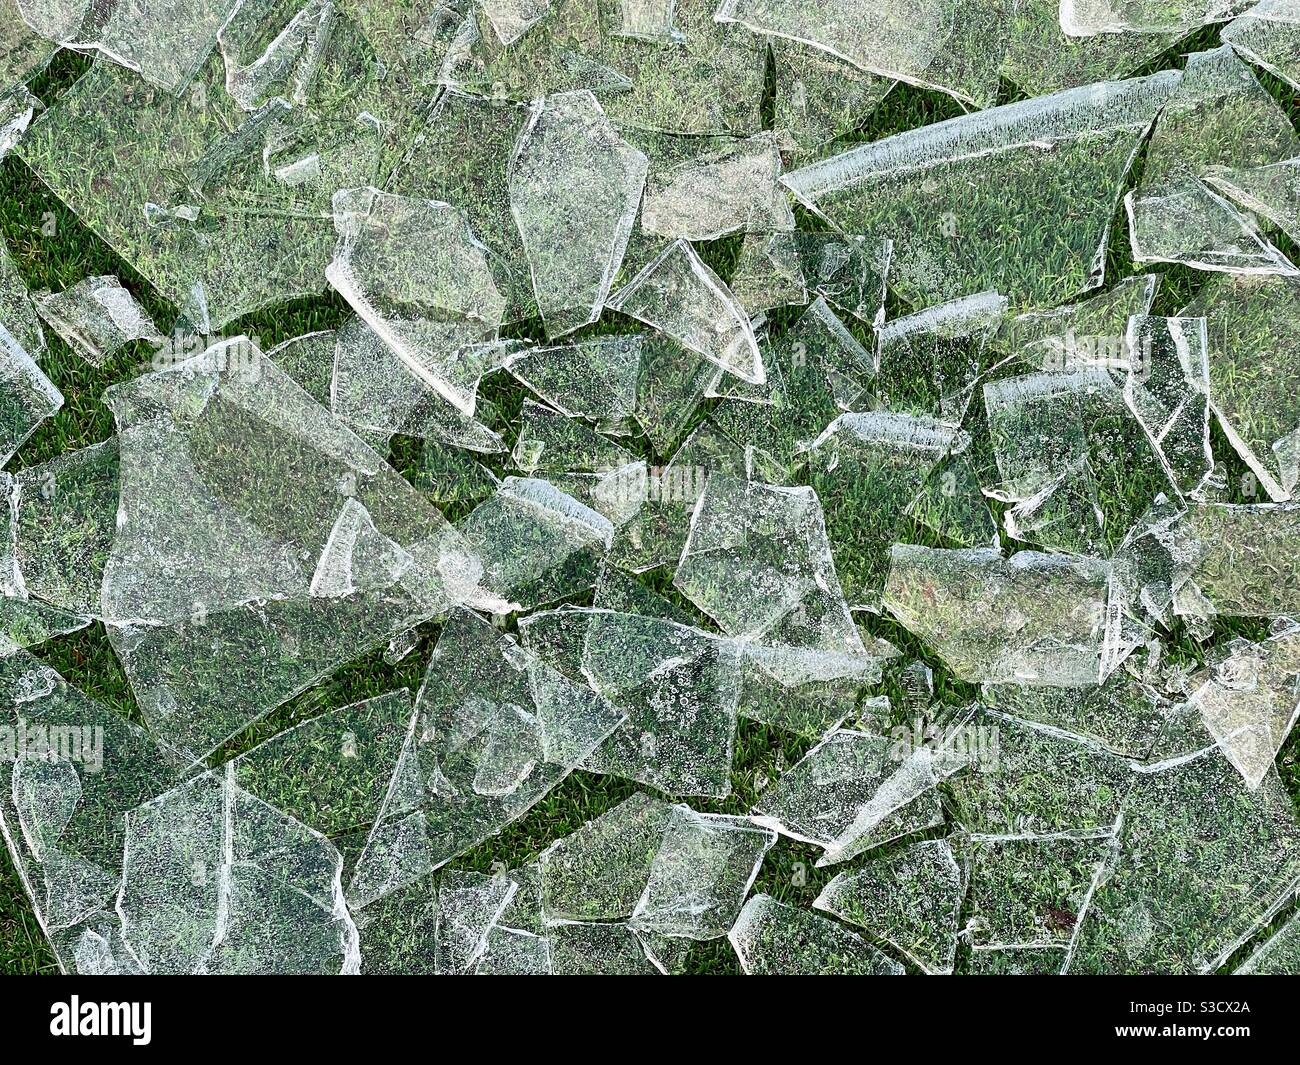 Broken ice on a lawn. No people. Stock Photo